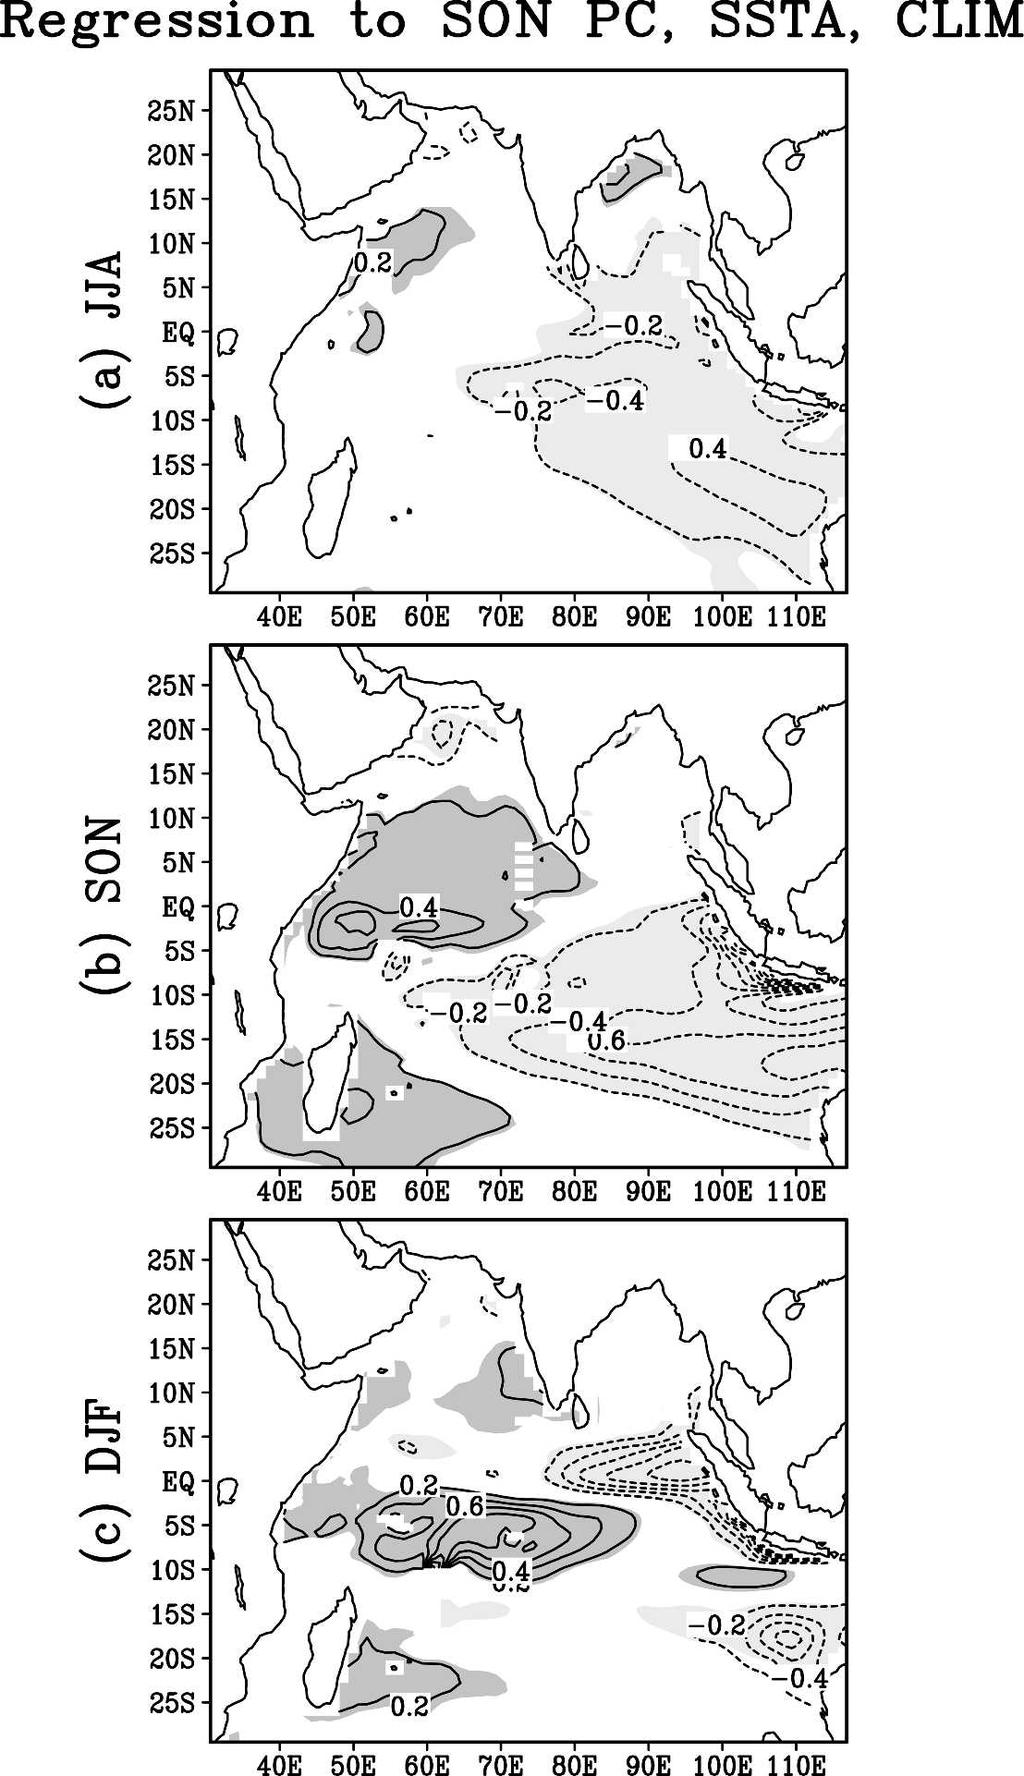 This process of ENSO influence is consistent with the scenario described by Huang and Shukla (2007) under prescribed SST forcing in the Pacific.